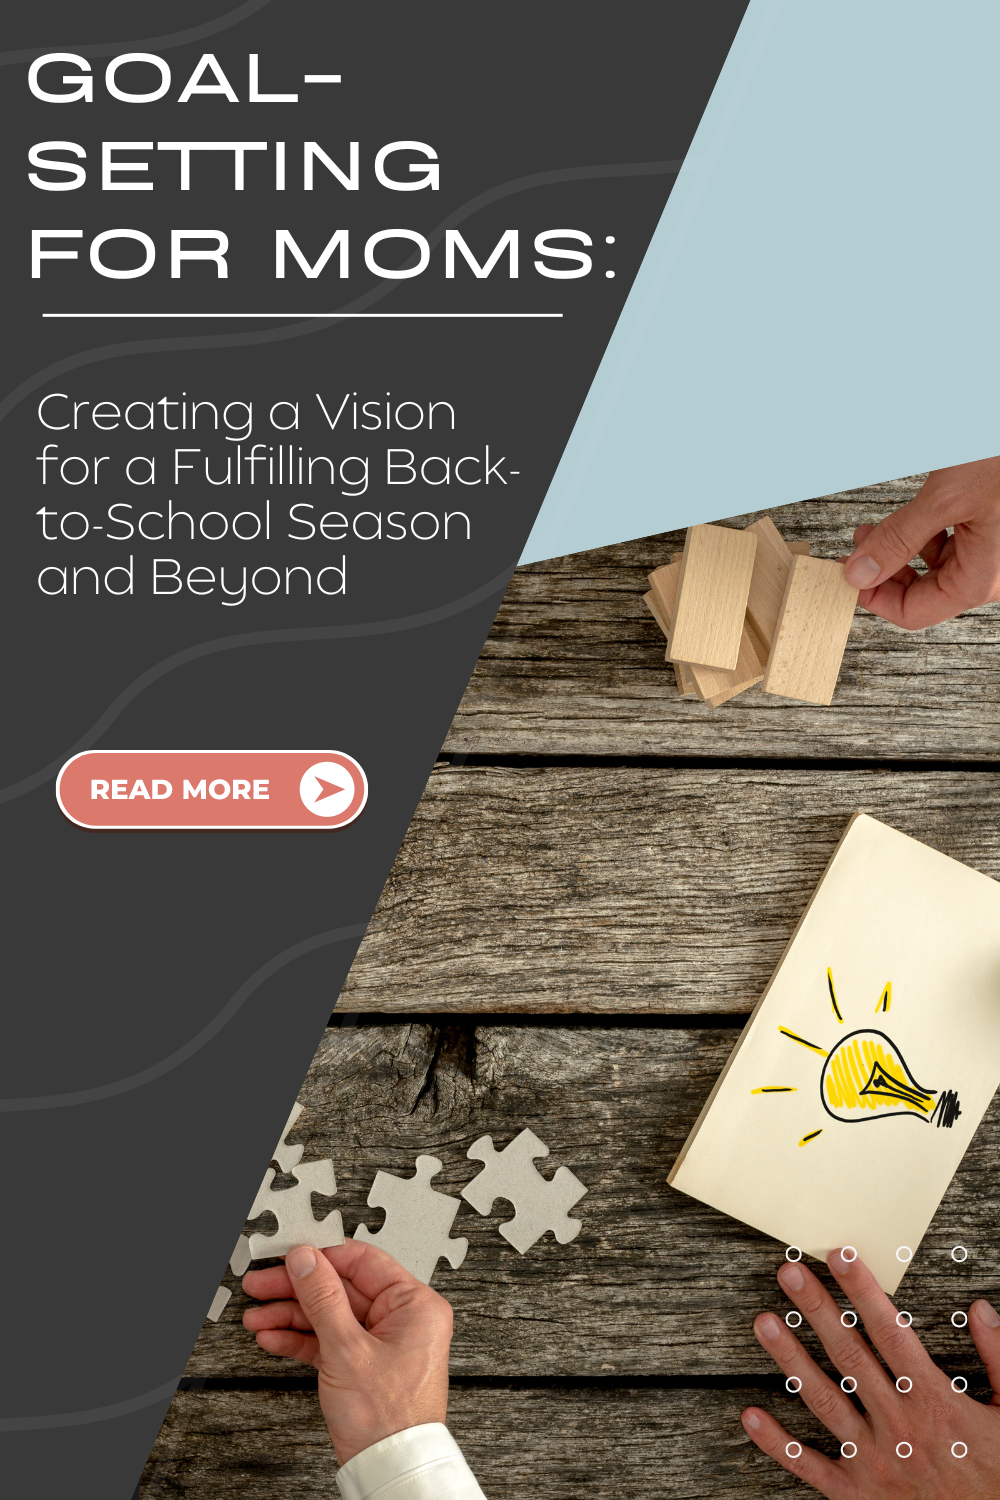 Goal-Setting for Moms: Creating a Vision for a Fulfilling Back-to-School Season and Beyond